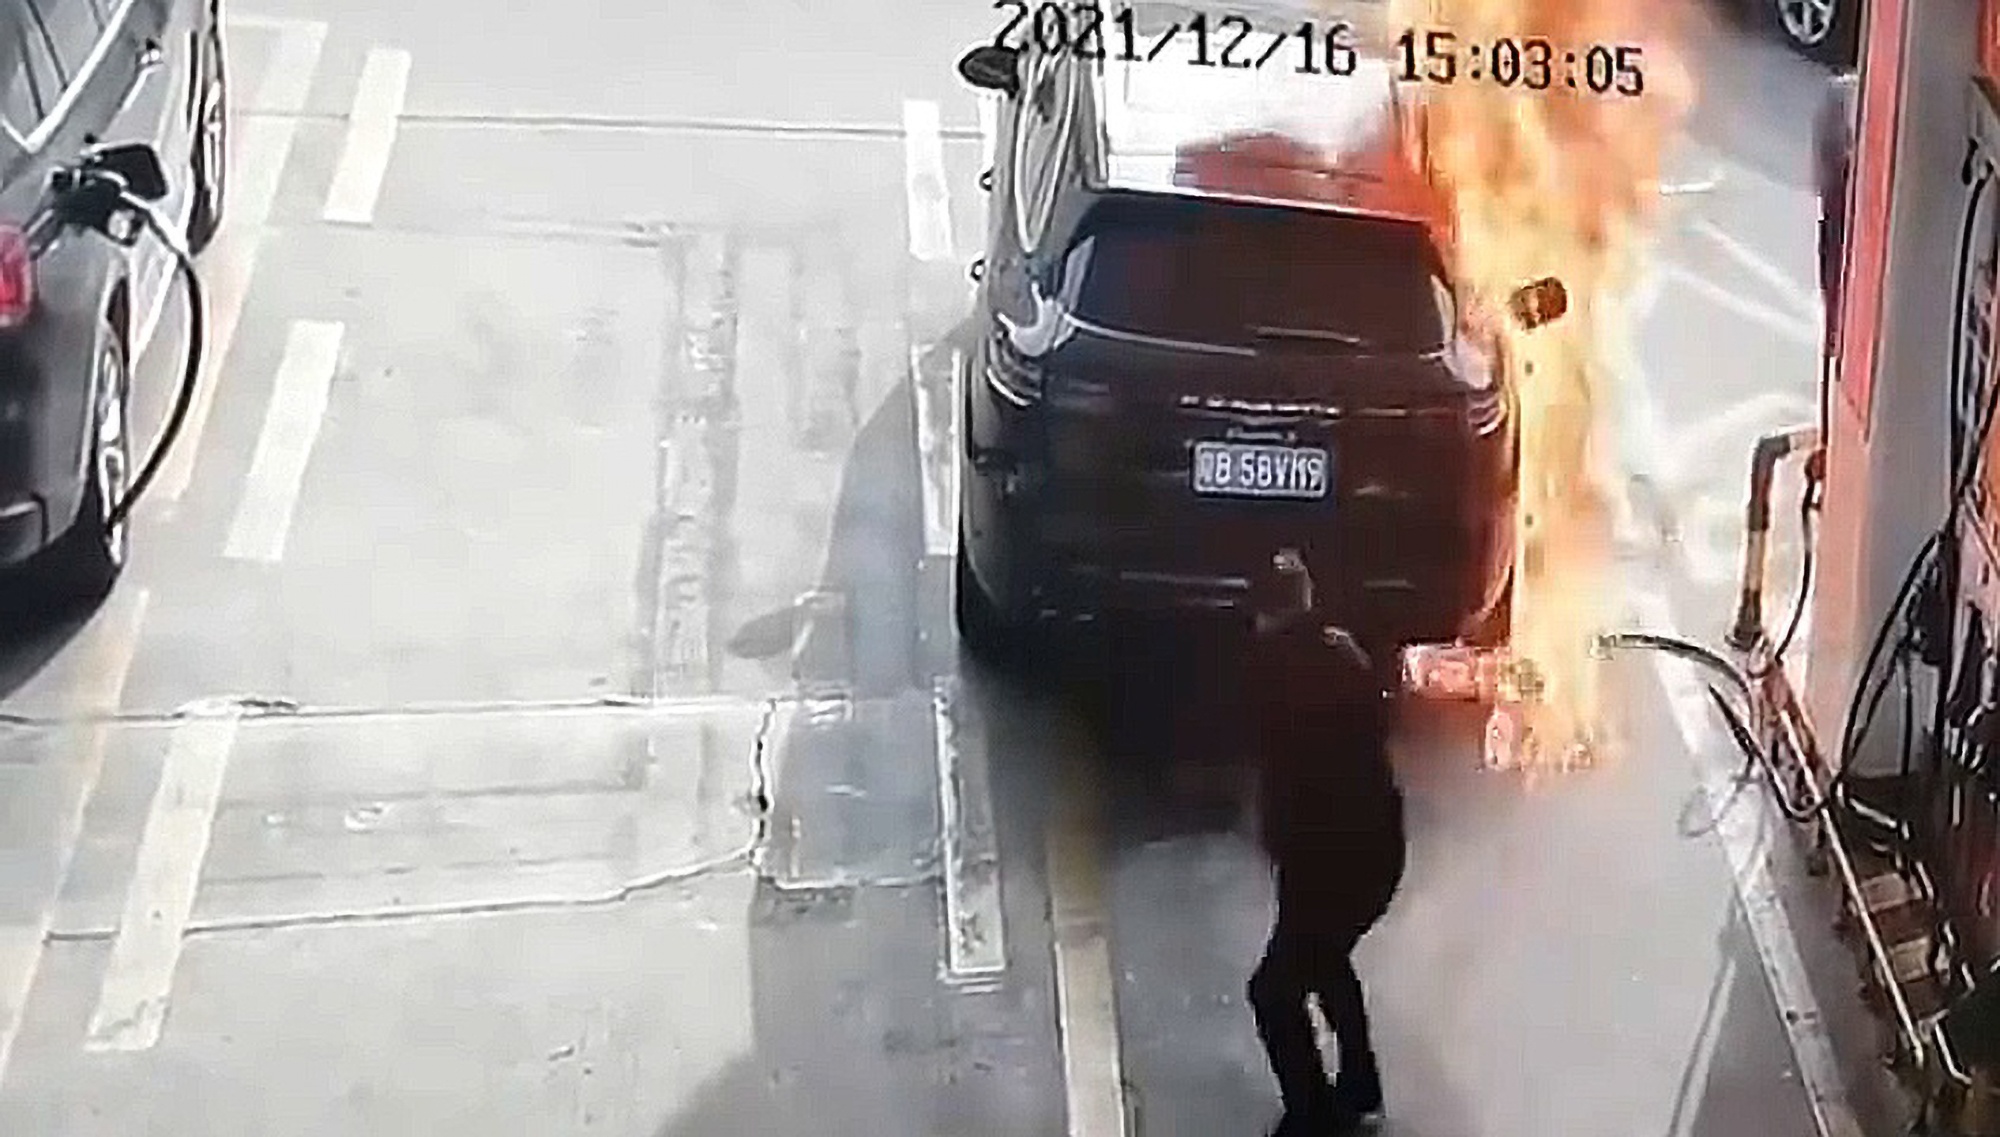 Read more about the article Moment Man Sets Porsche On Fire At Petrol Station